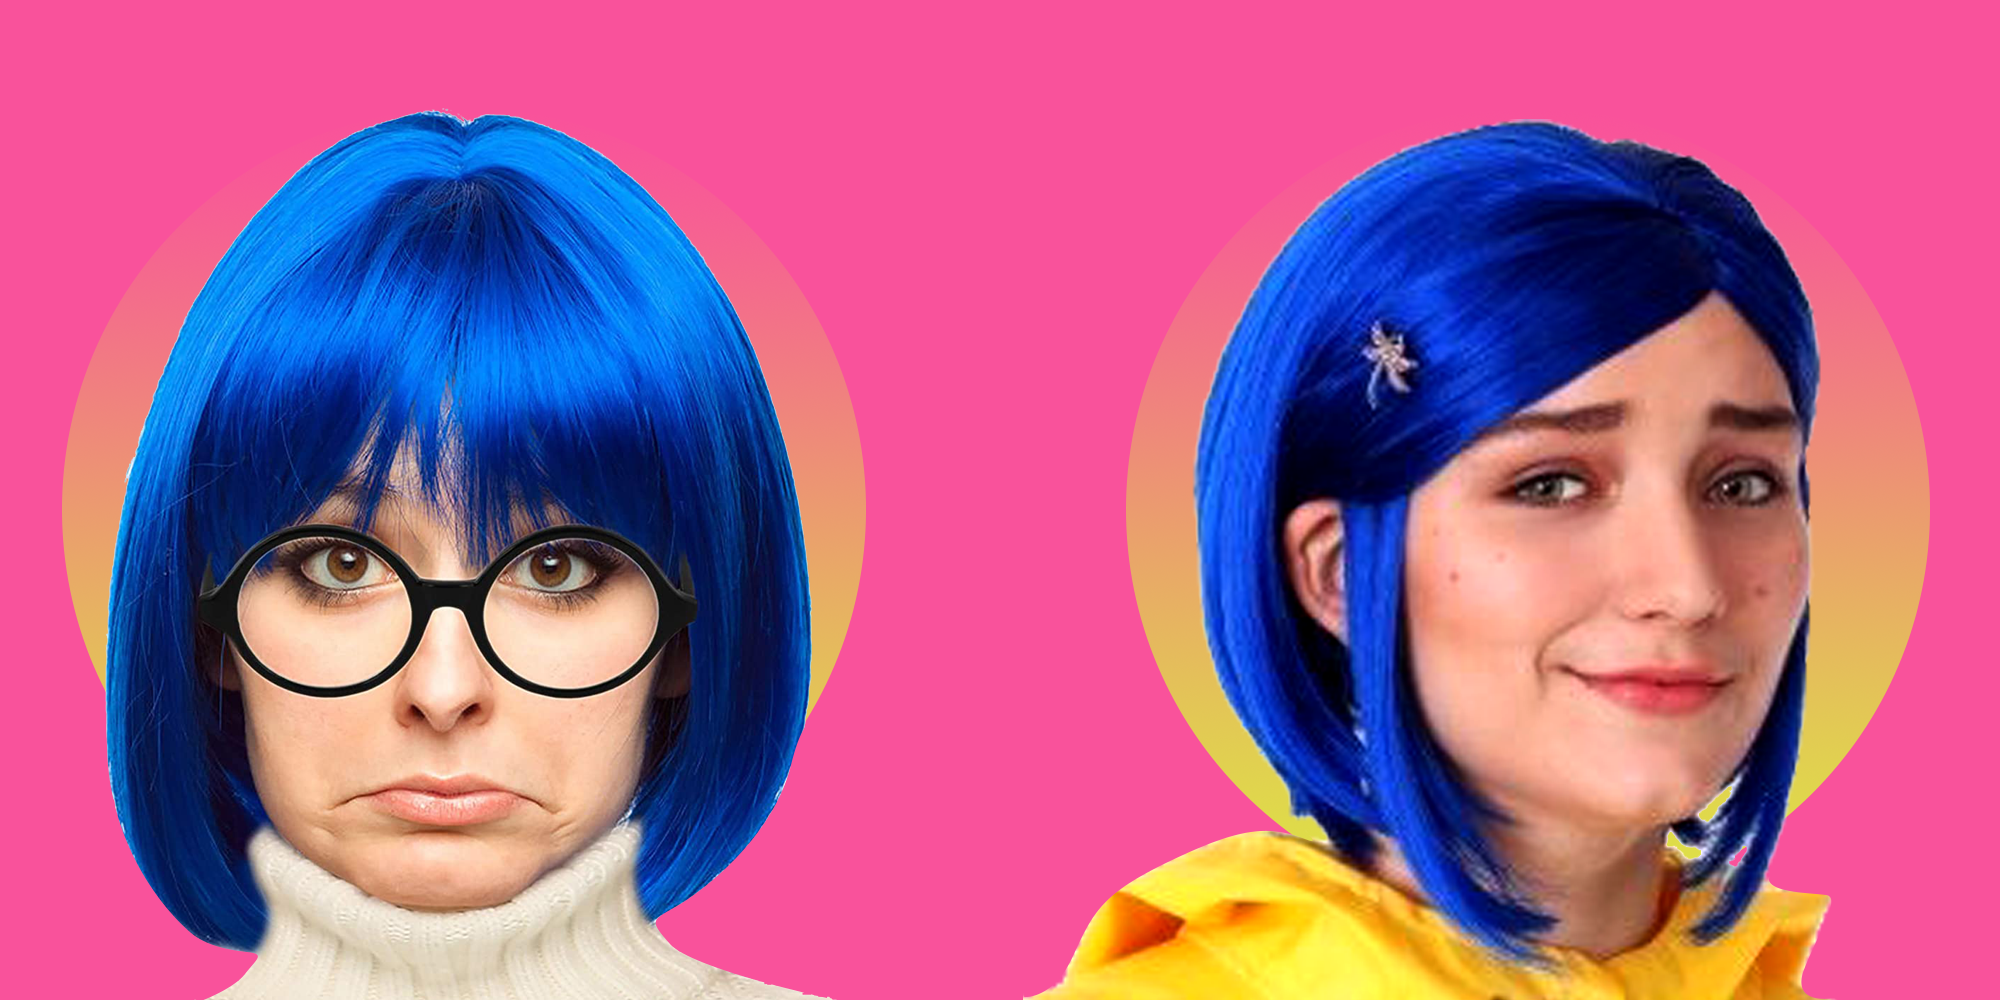 Halloween costumes with blue hair